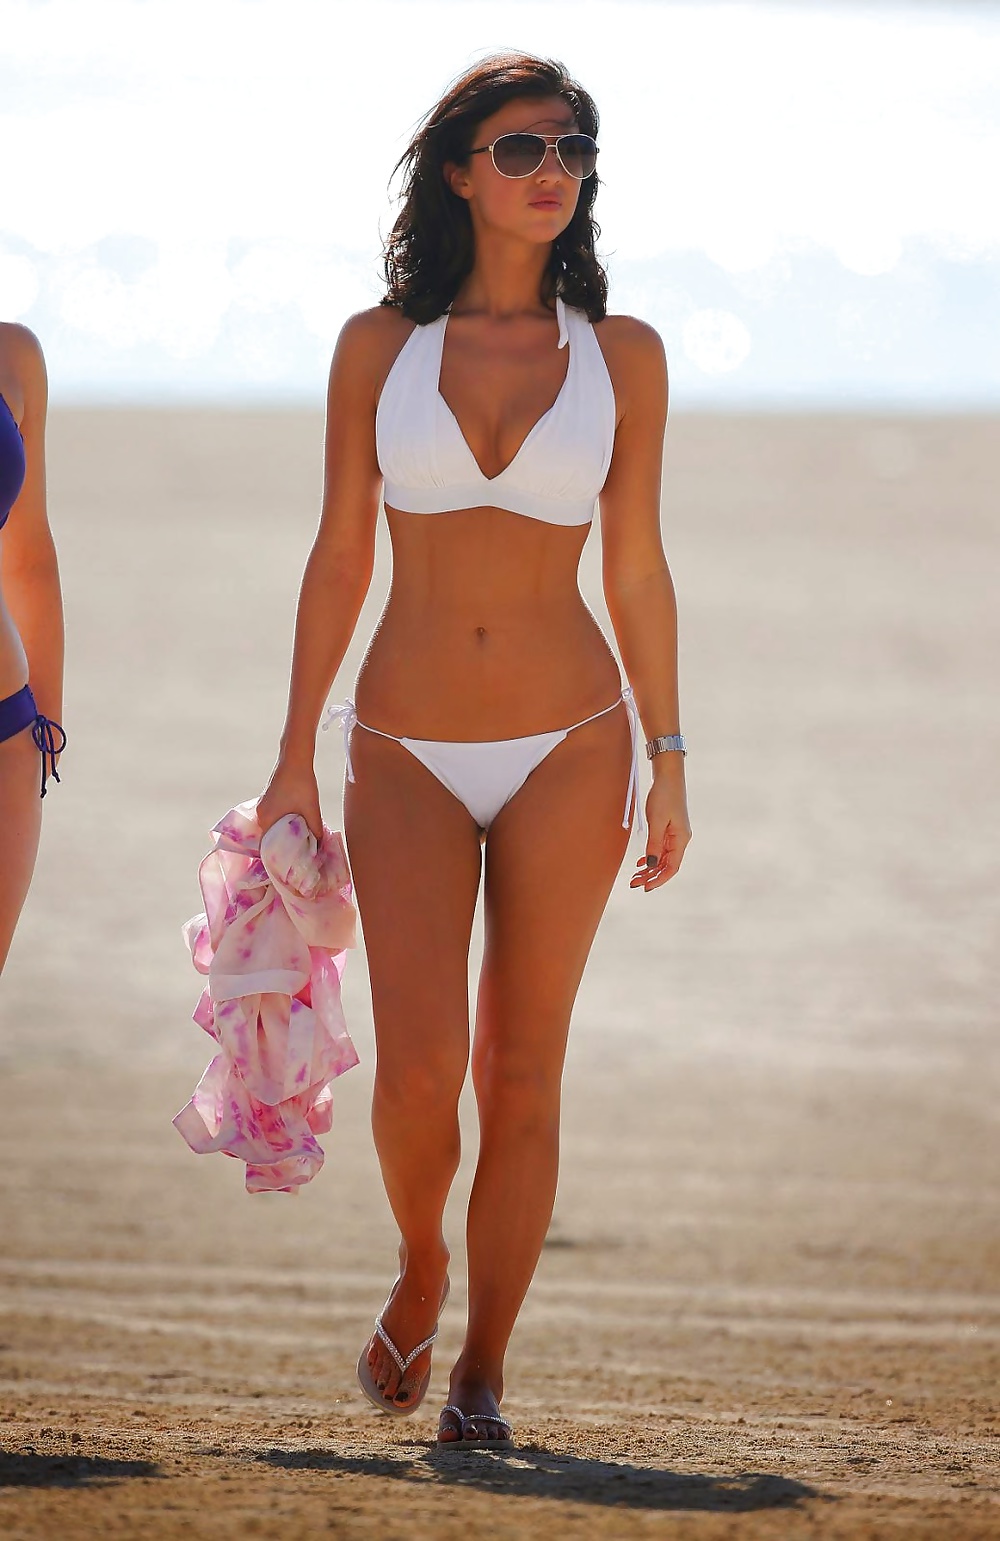 Lucy Mecklenburgh camel toe #30227232